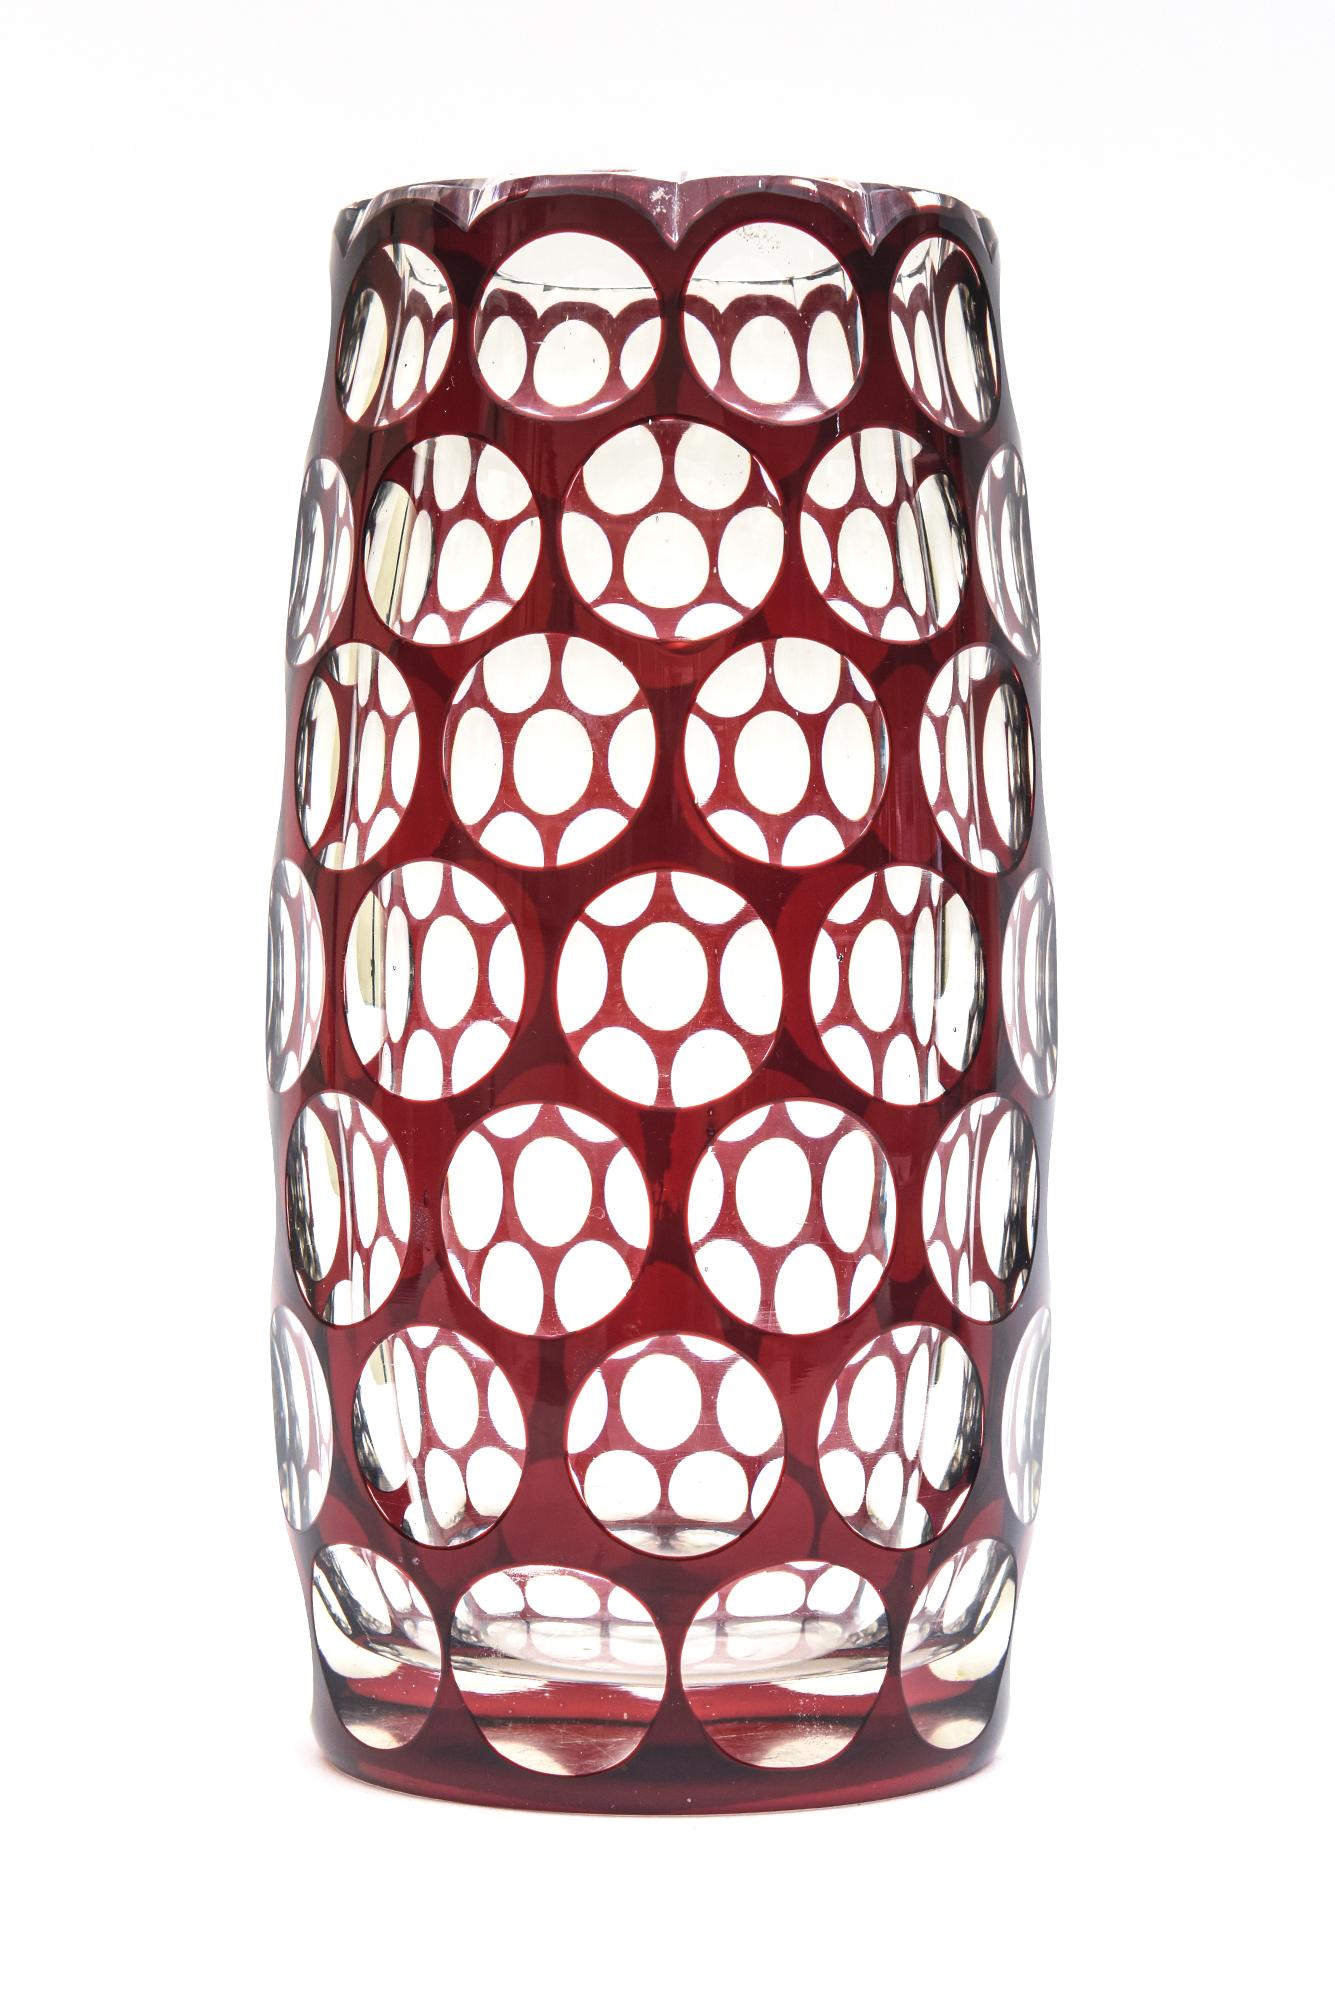 Honeycomb Optic Vintage Burgundy Red and Clear Czech Glass Vase In Good Condition For Sale In North Miami, FL